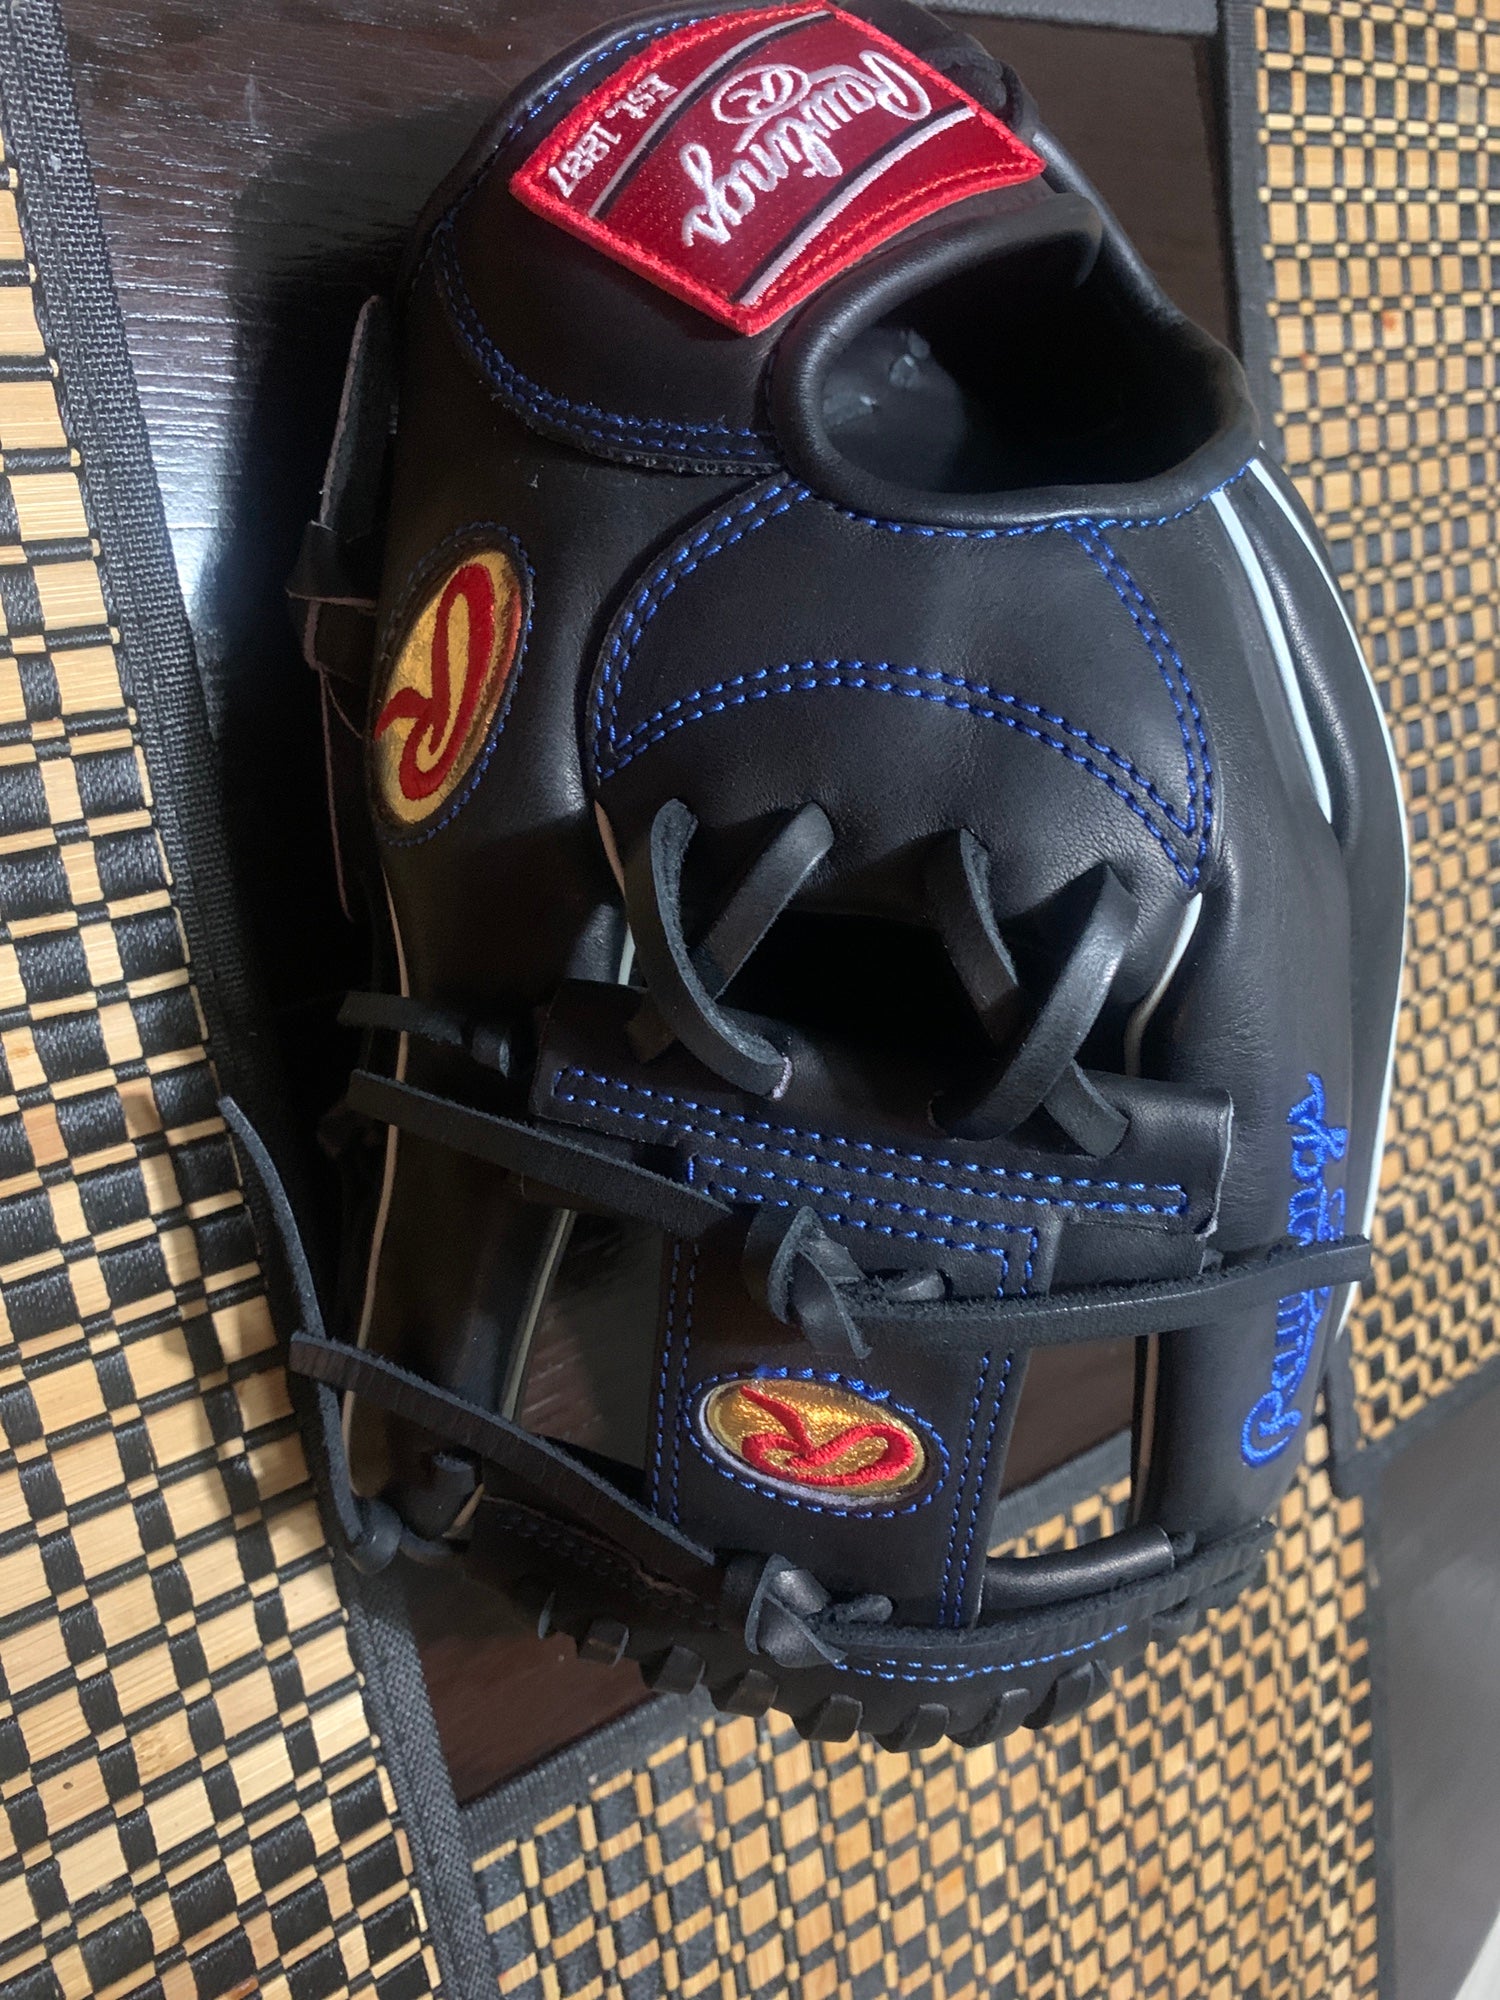 Rawlings Baseball on X: The Gameday 57 Series was created to celebrate the  “Finest in the Field”. For March we celebrate Kolten Wong's Gameday model  which features a unique gold 'Oval R'.